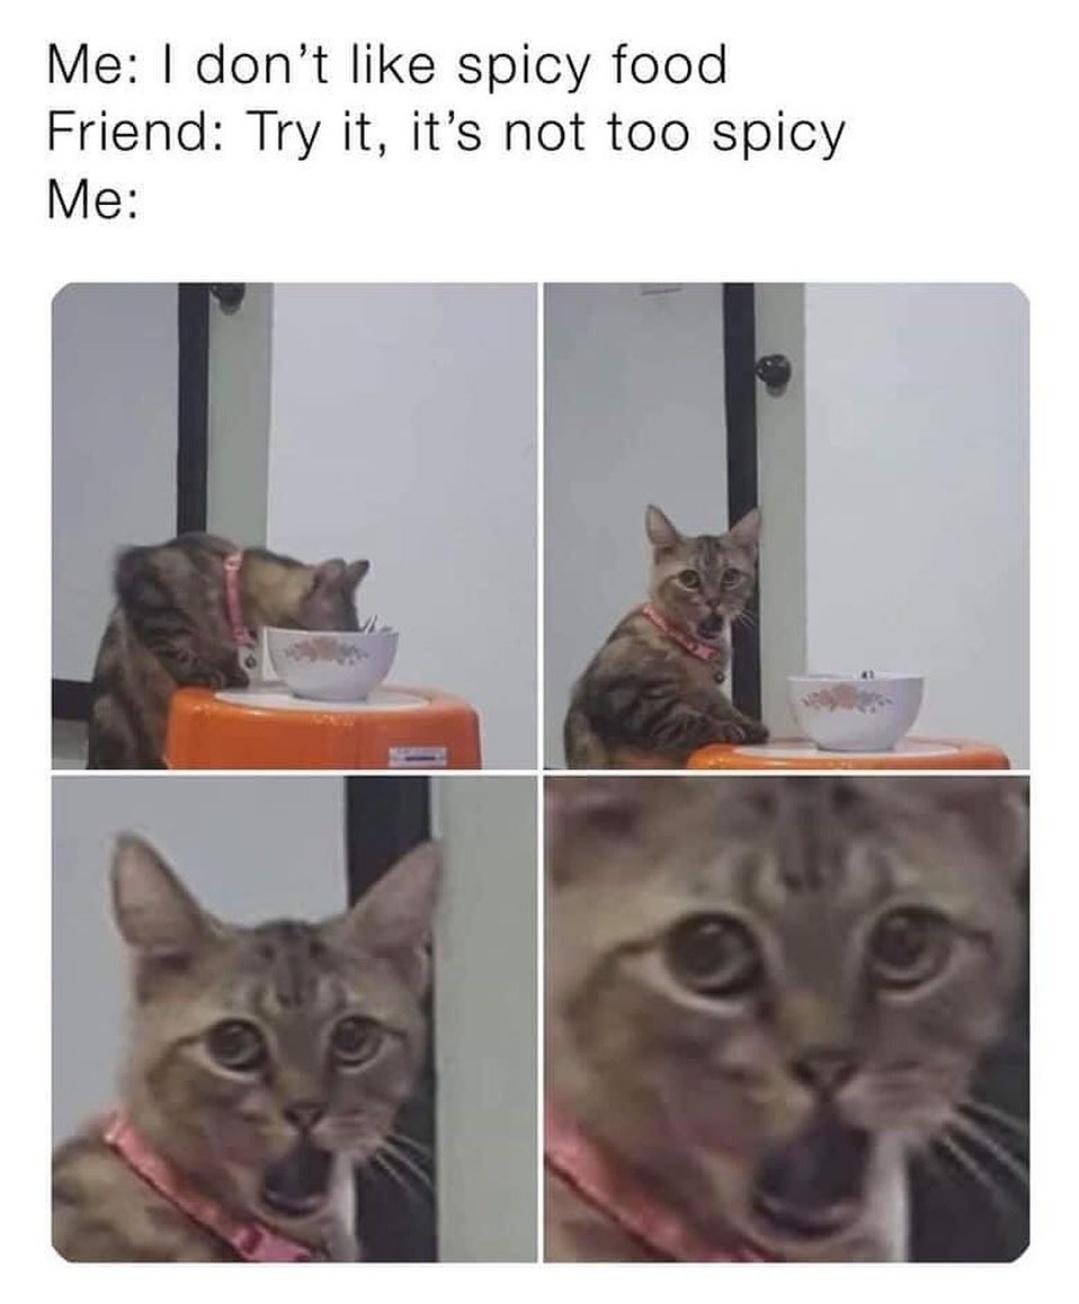 not+spicy+at+all.+see%21